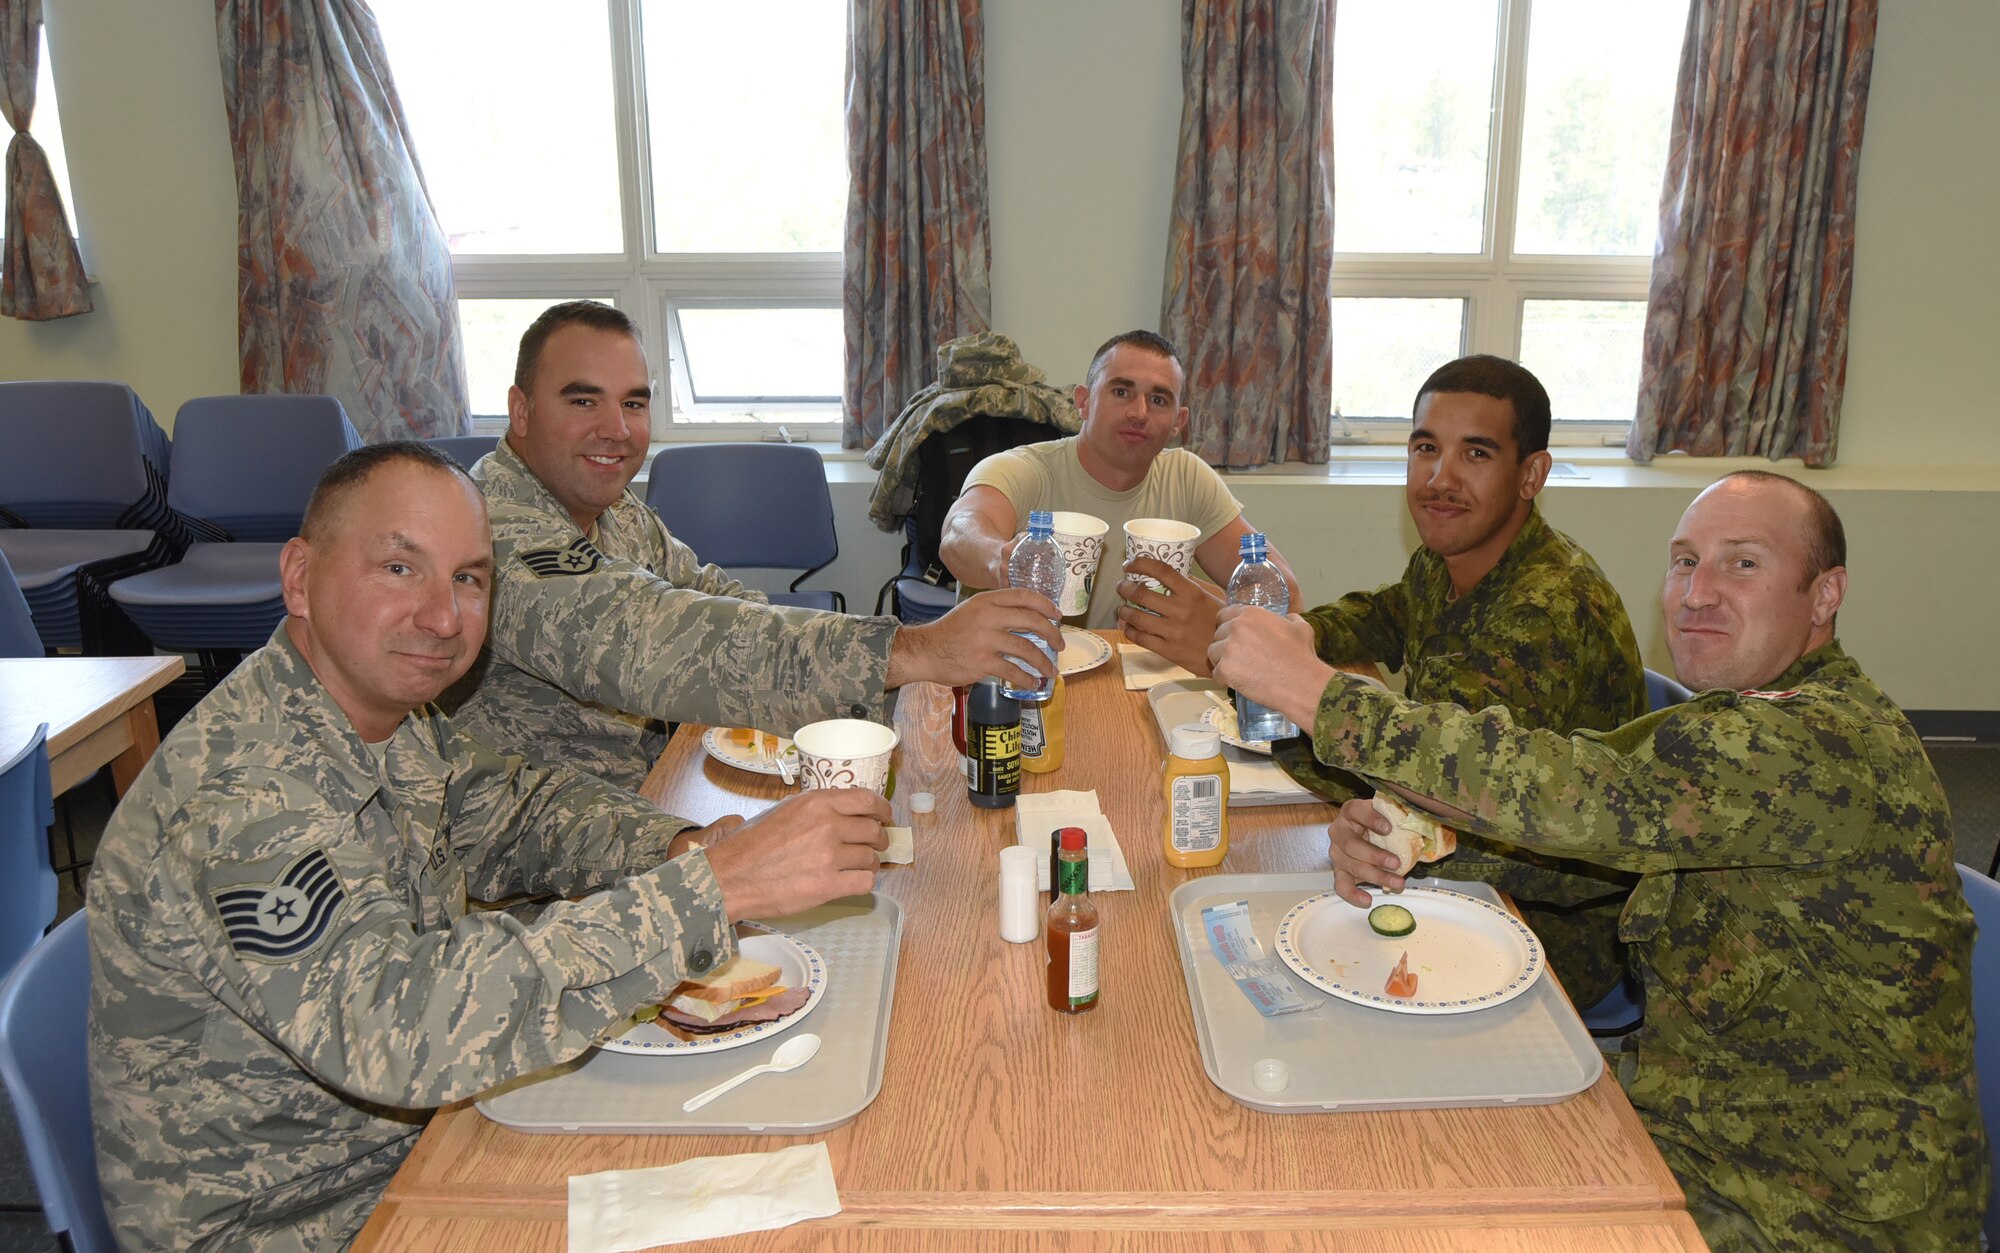 Oregon Air National Guard members along with Canadian Military members from Cold Lake, Alberta, enjoy lunch together during their joint Deployment for Training (DFT) in Yellowknife, Northwest Territories, Canada, July 20, 2017. The Civil Engineer Airmen are spending two-weeks in Canada working with Canadian Armed Forces members from Cold Lake, Alberta, Canada, on a variety of projects during their DFT. (Picured from left to right) Tech. Sgt. David Sherman, Staff Sgt. Tyler O'Bryant, Staff Sgt. Michael Templeton, Private Corey Blackmore and Corporal Kyle Burrow. (U.S. Air National Guard photo/Master Sgt. John Hughel, 142nd Fighter Wing Public Affairs)